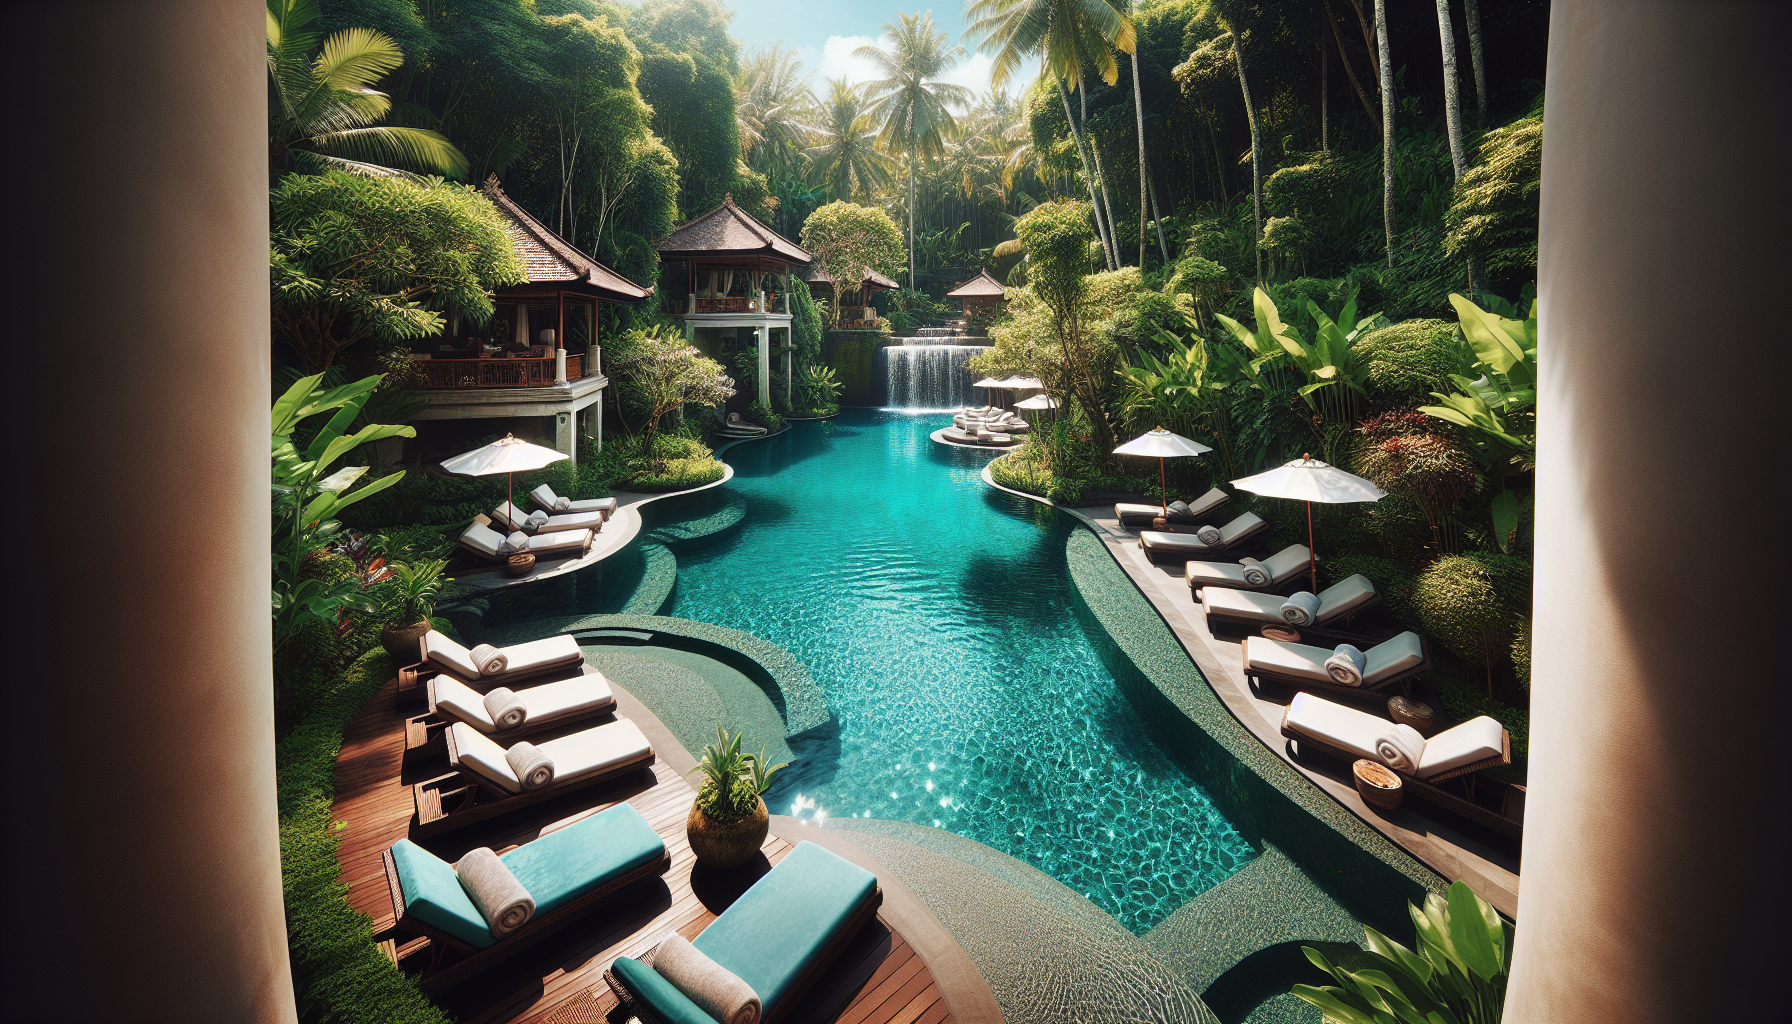 Exclusive lagoon pool for 'Level' Junior Suite guests at Melia Bali